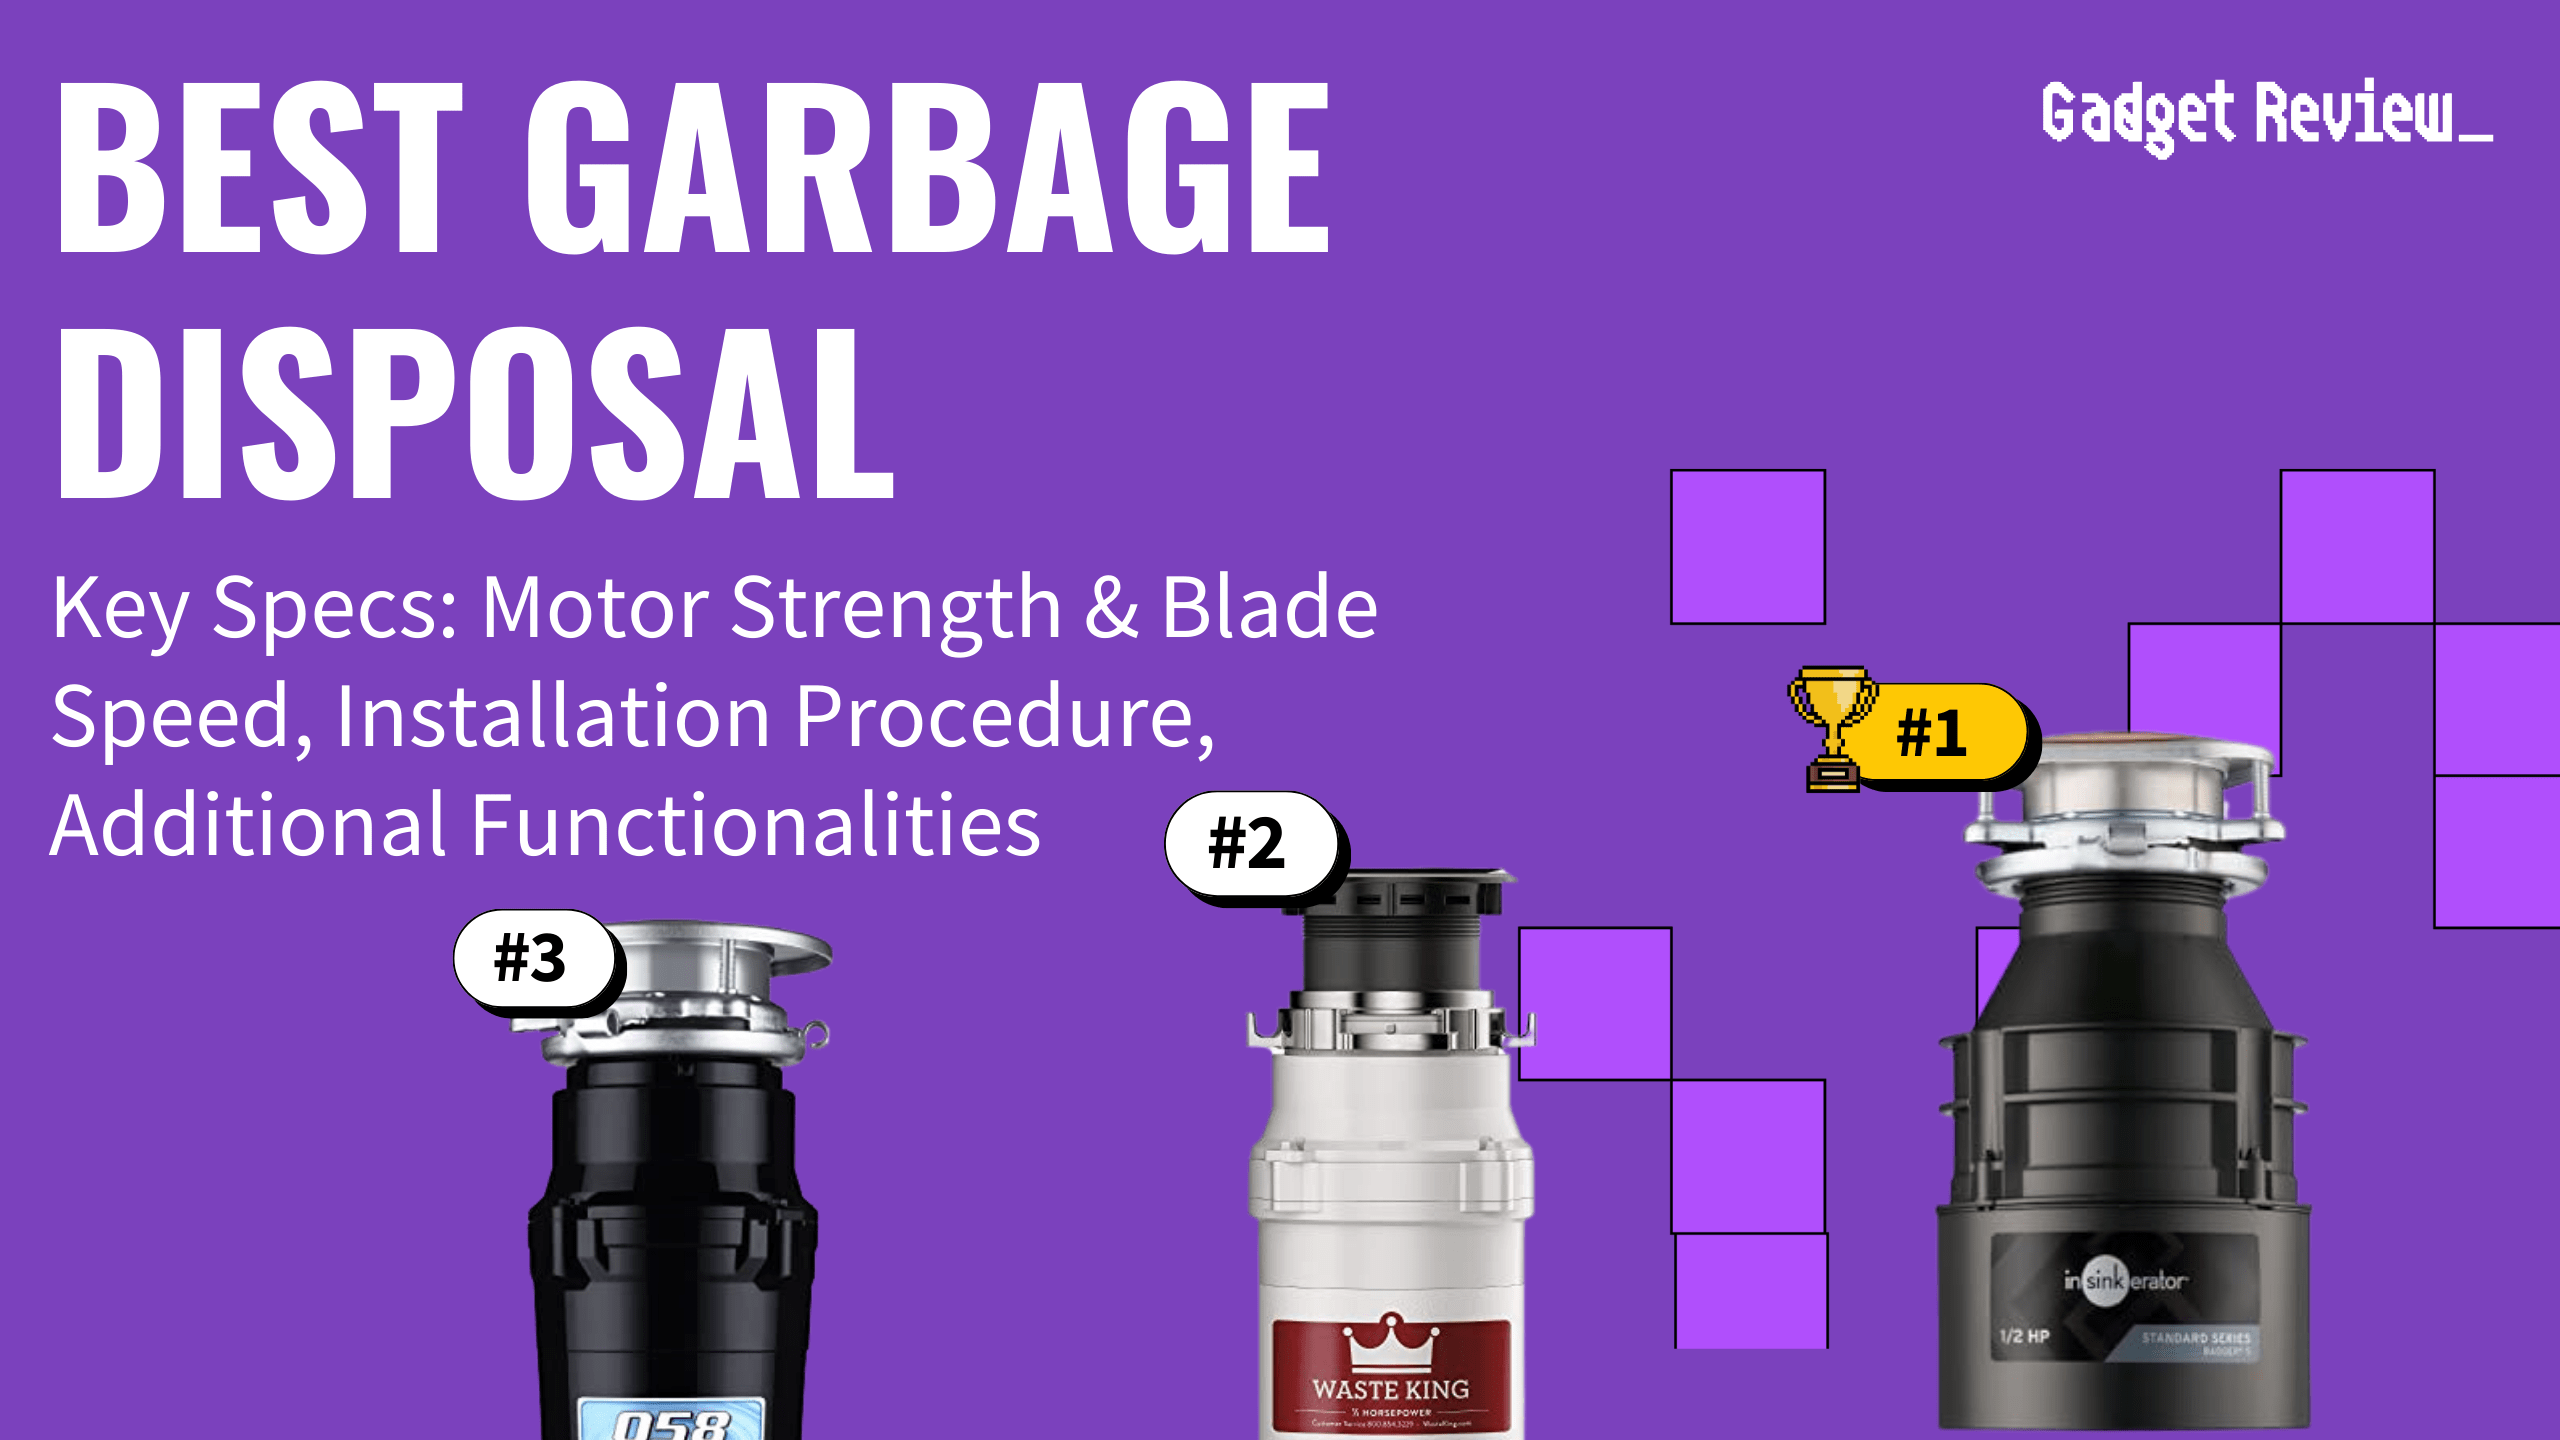 best garbage disposal featured image that shows the top three best kitchen product models